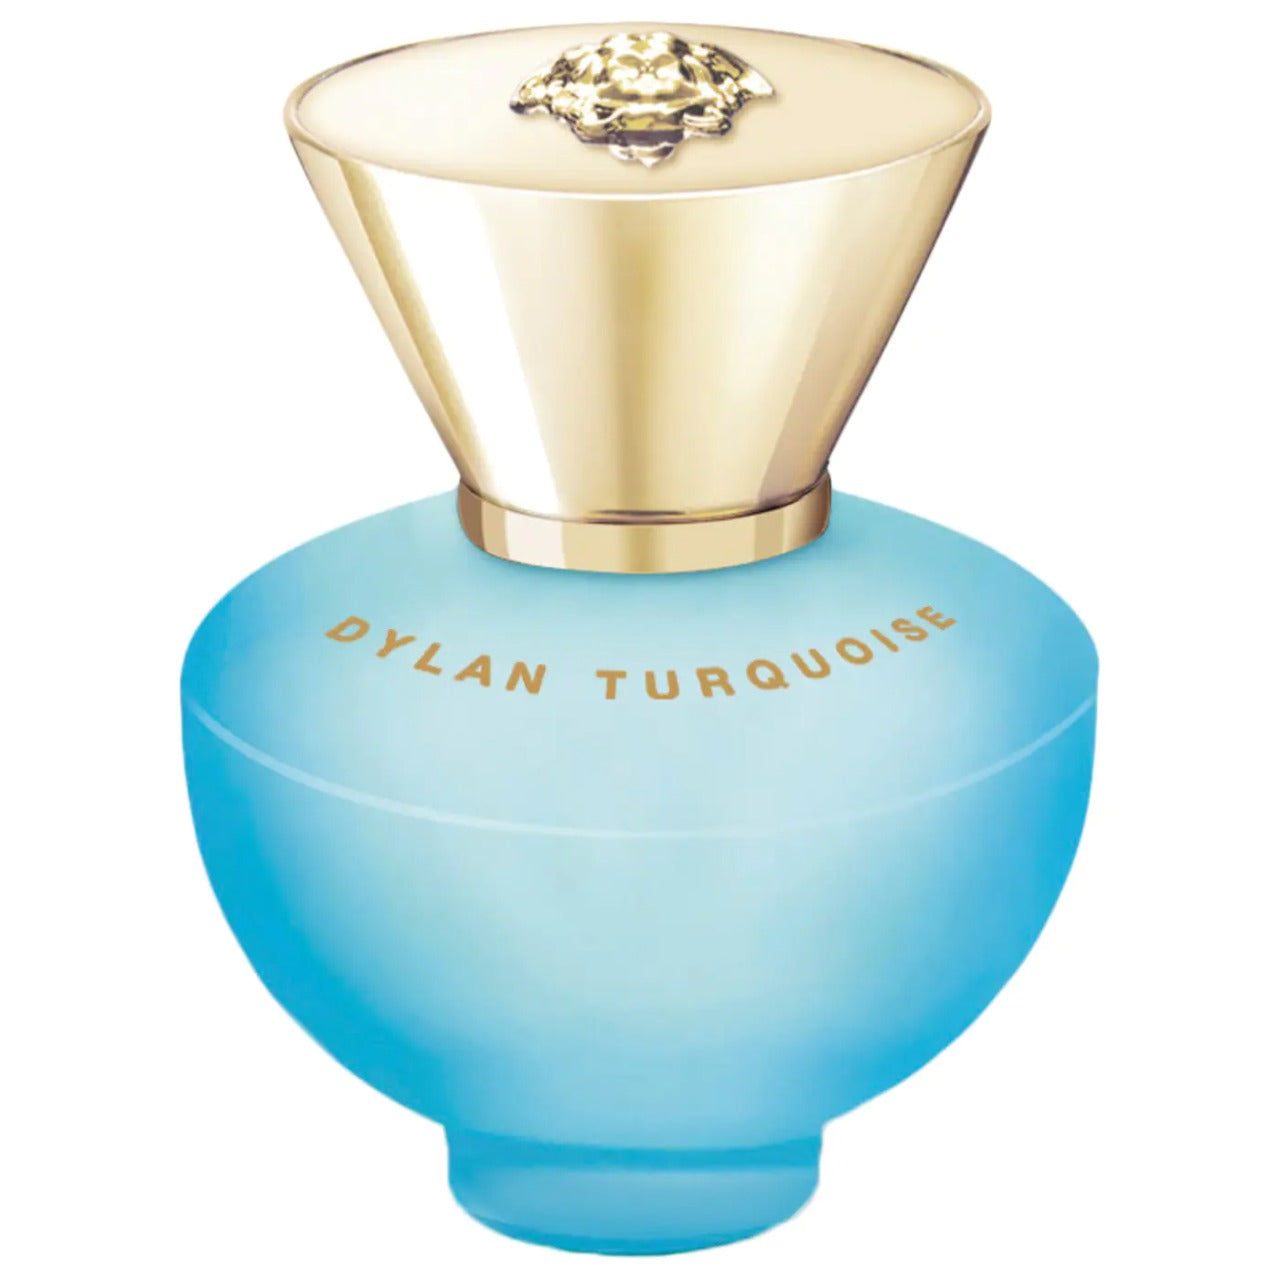 Versace Dylan Blue Turquoise trial size- 5mL